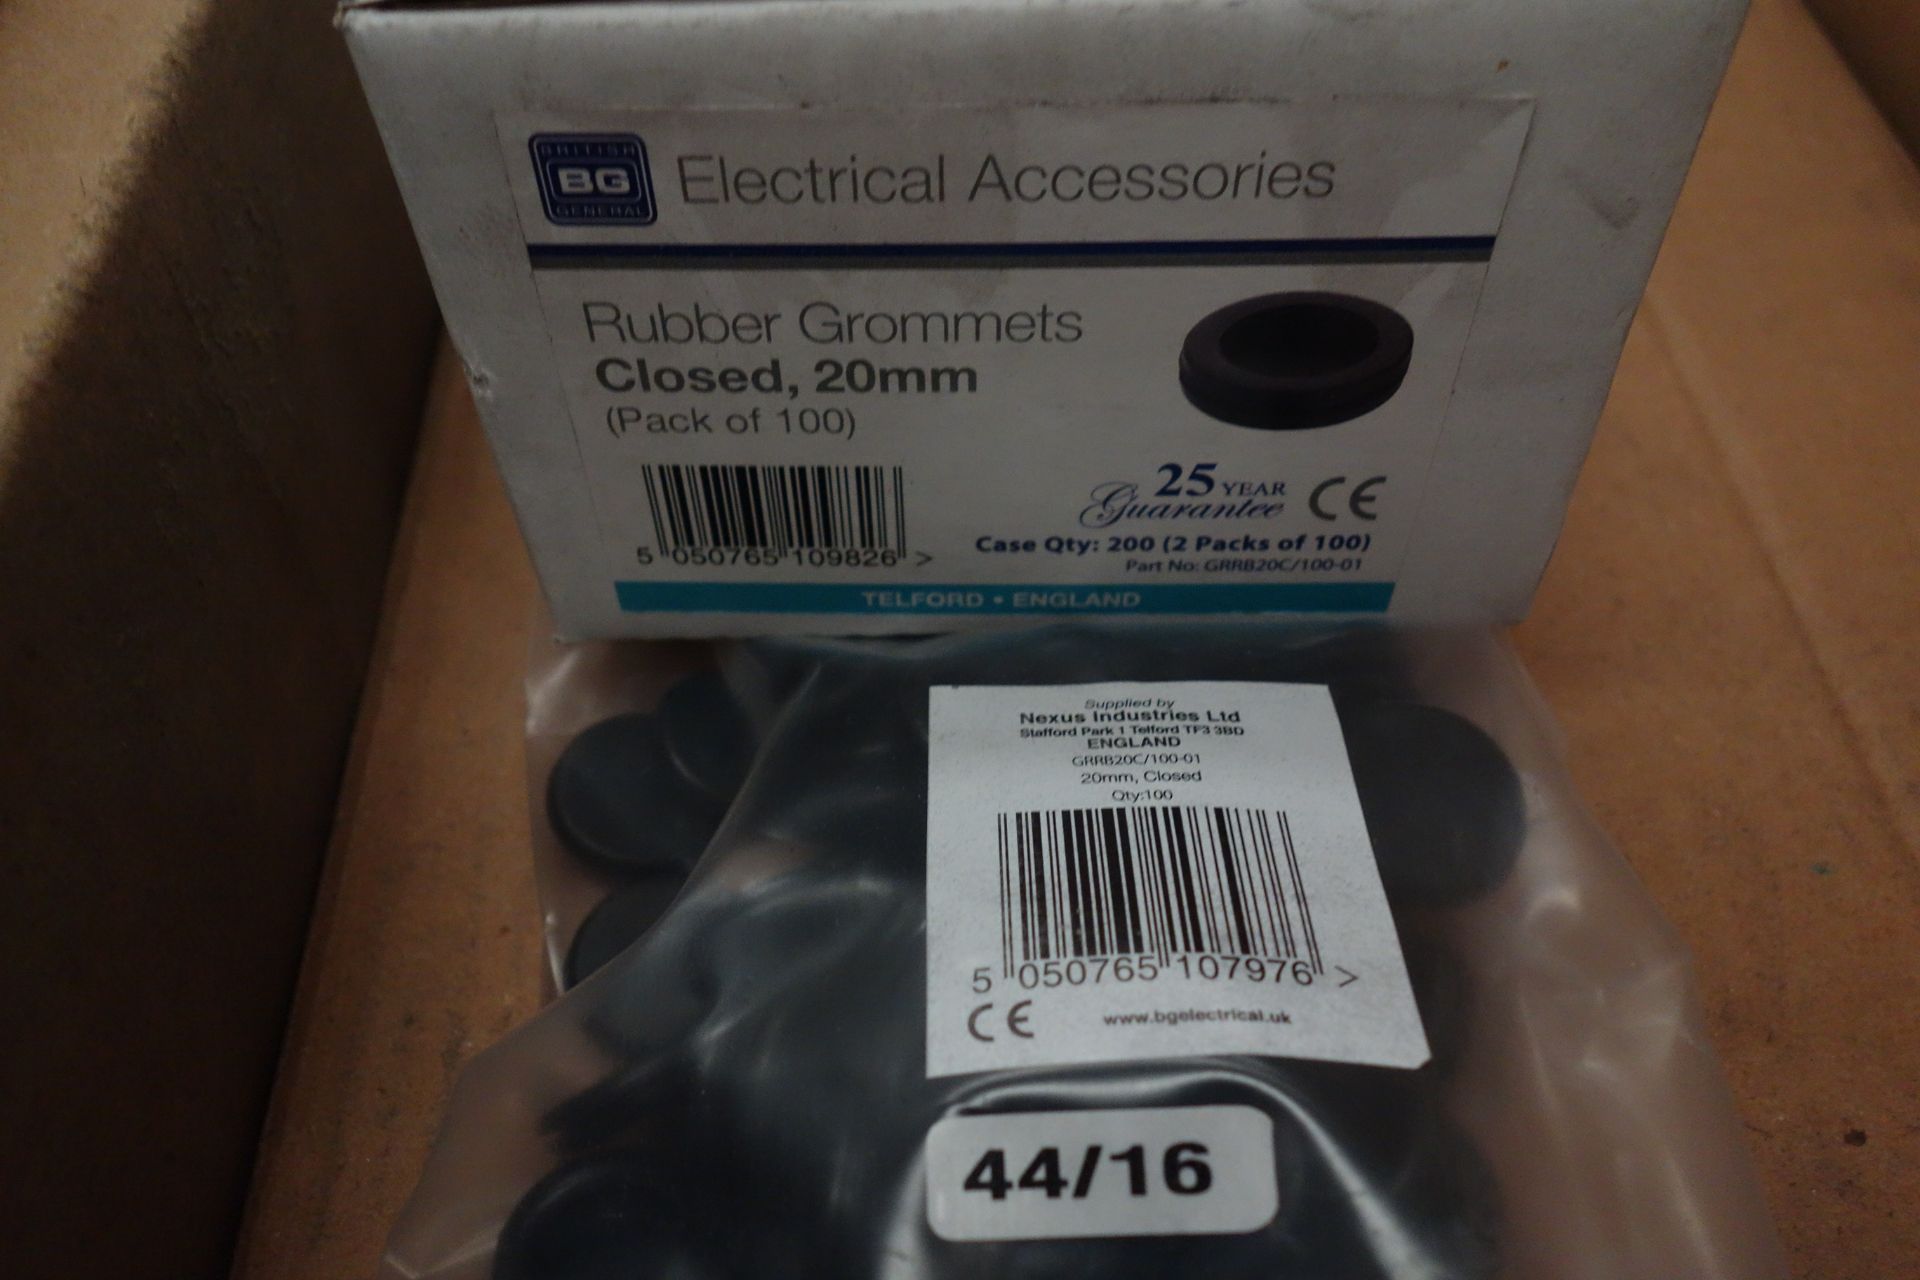 40 X Packs Of British General Rubber Grommets 20MM Closed 100 Per Pack